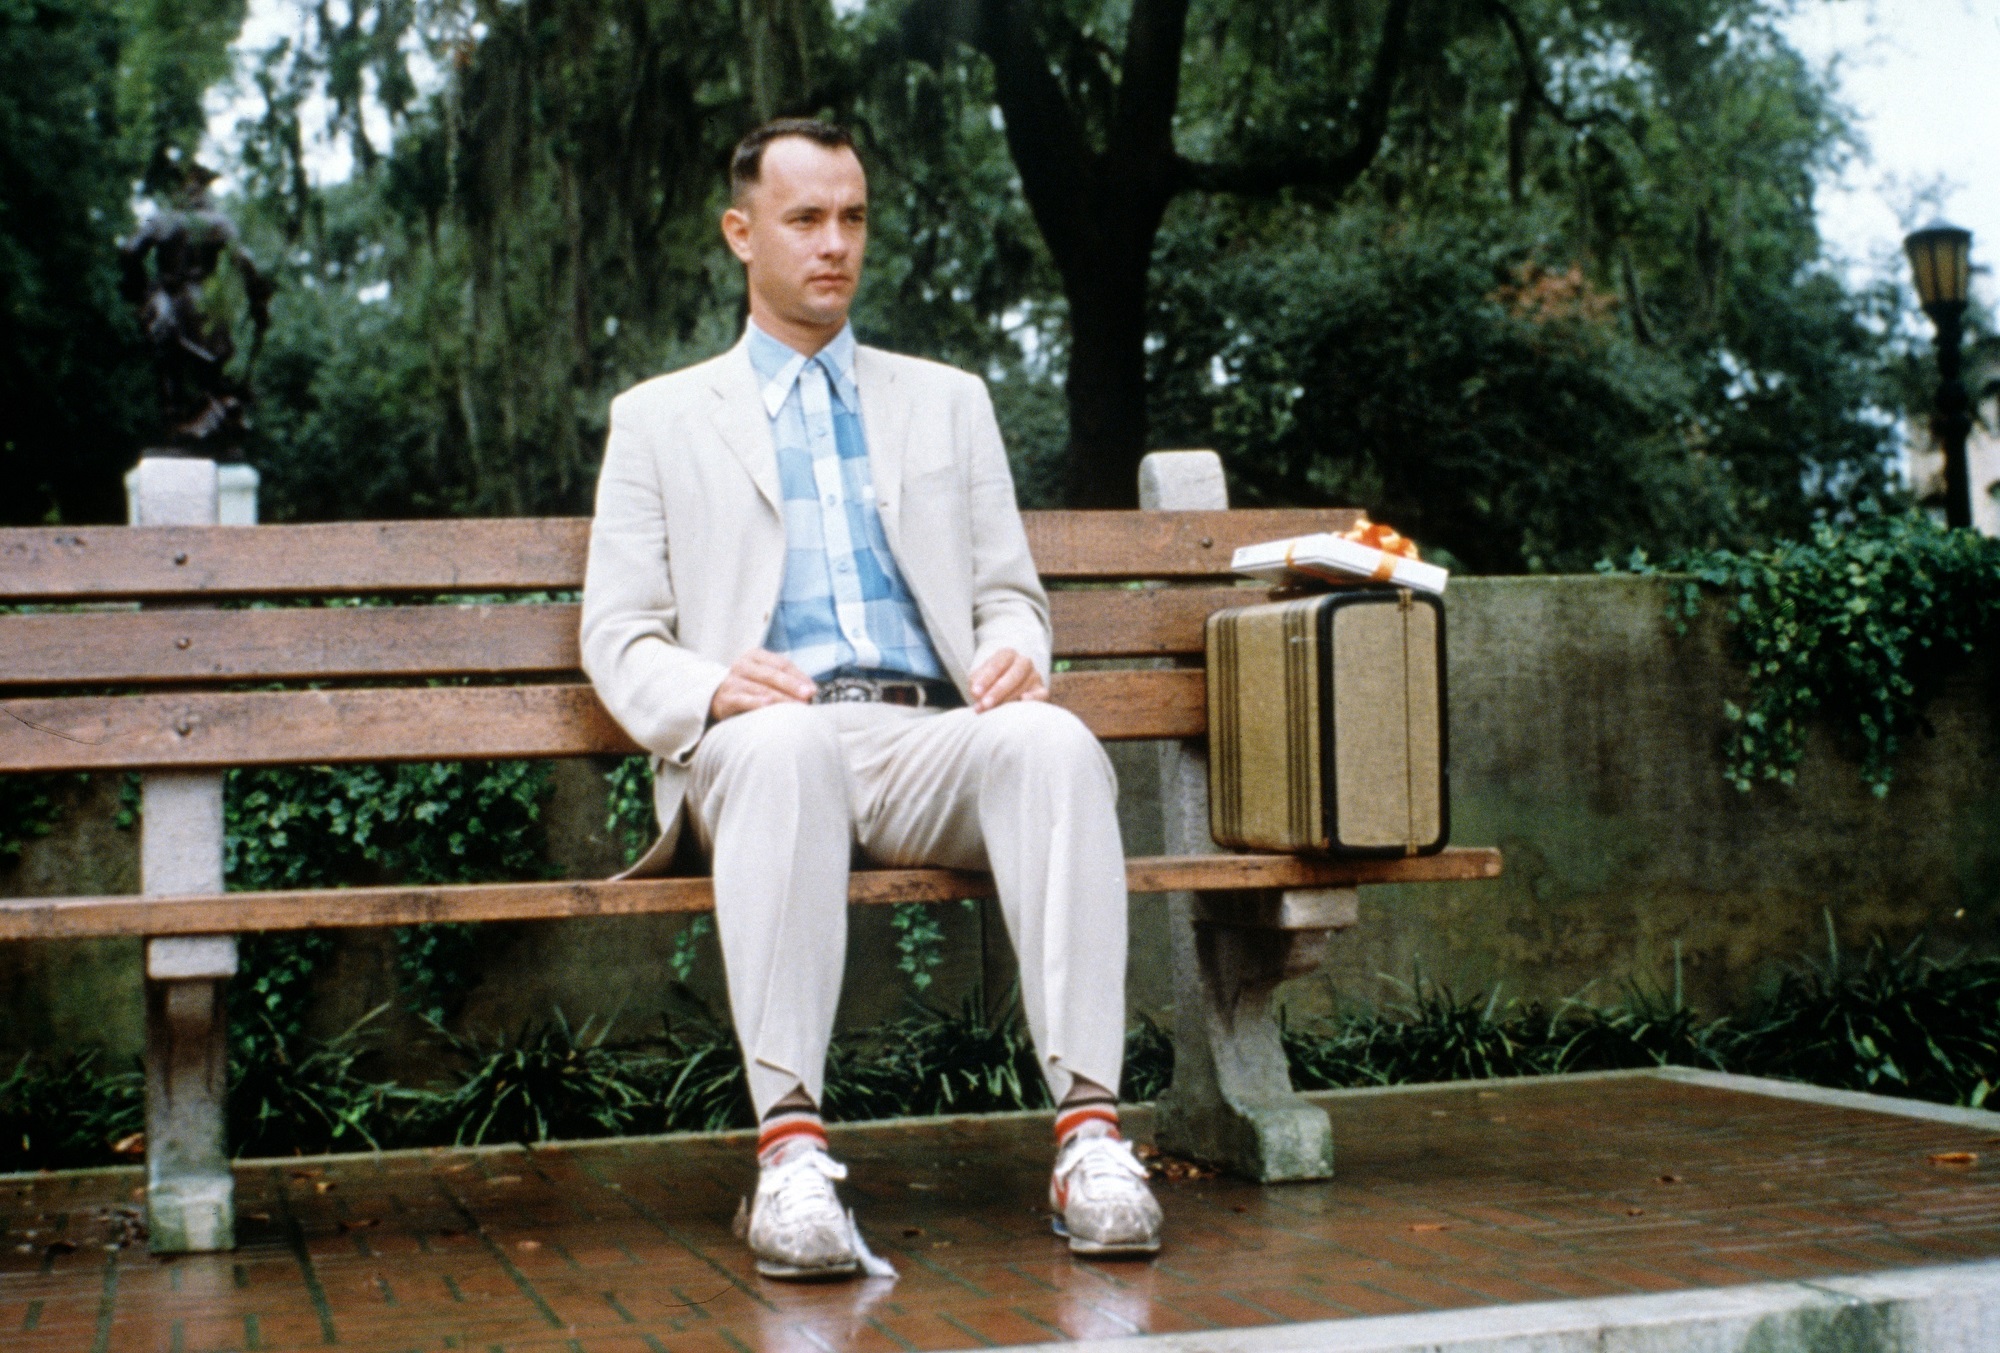 Forrest Gump sitting on the bench